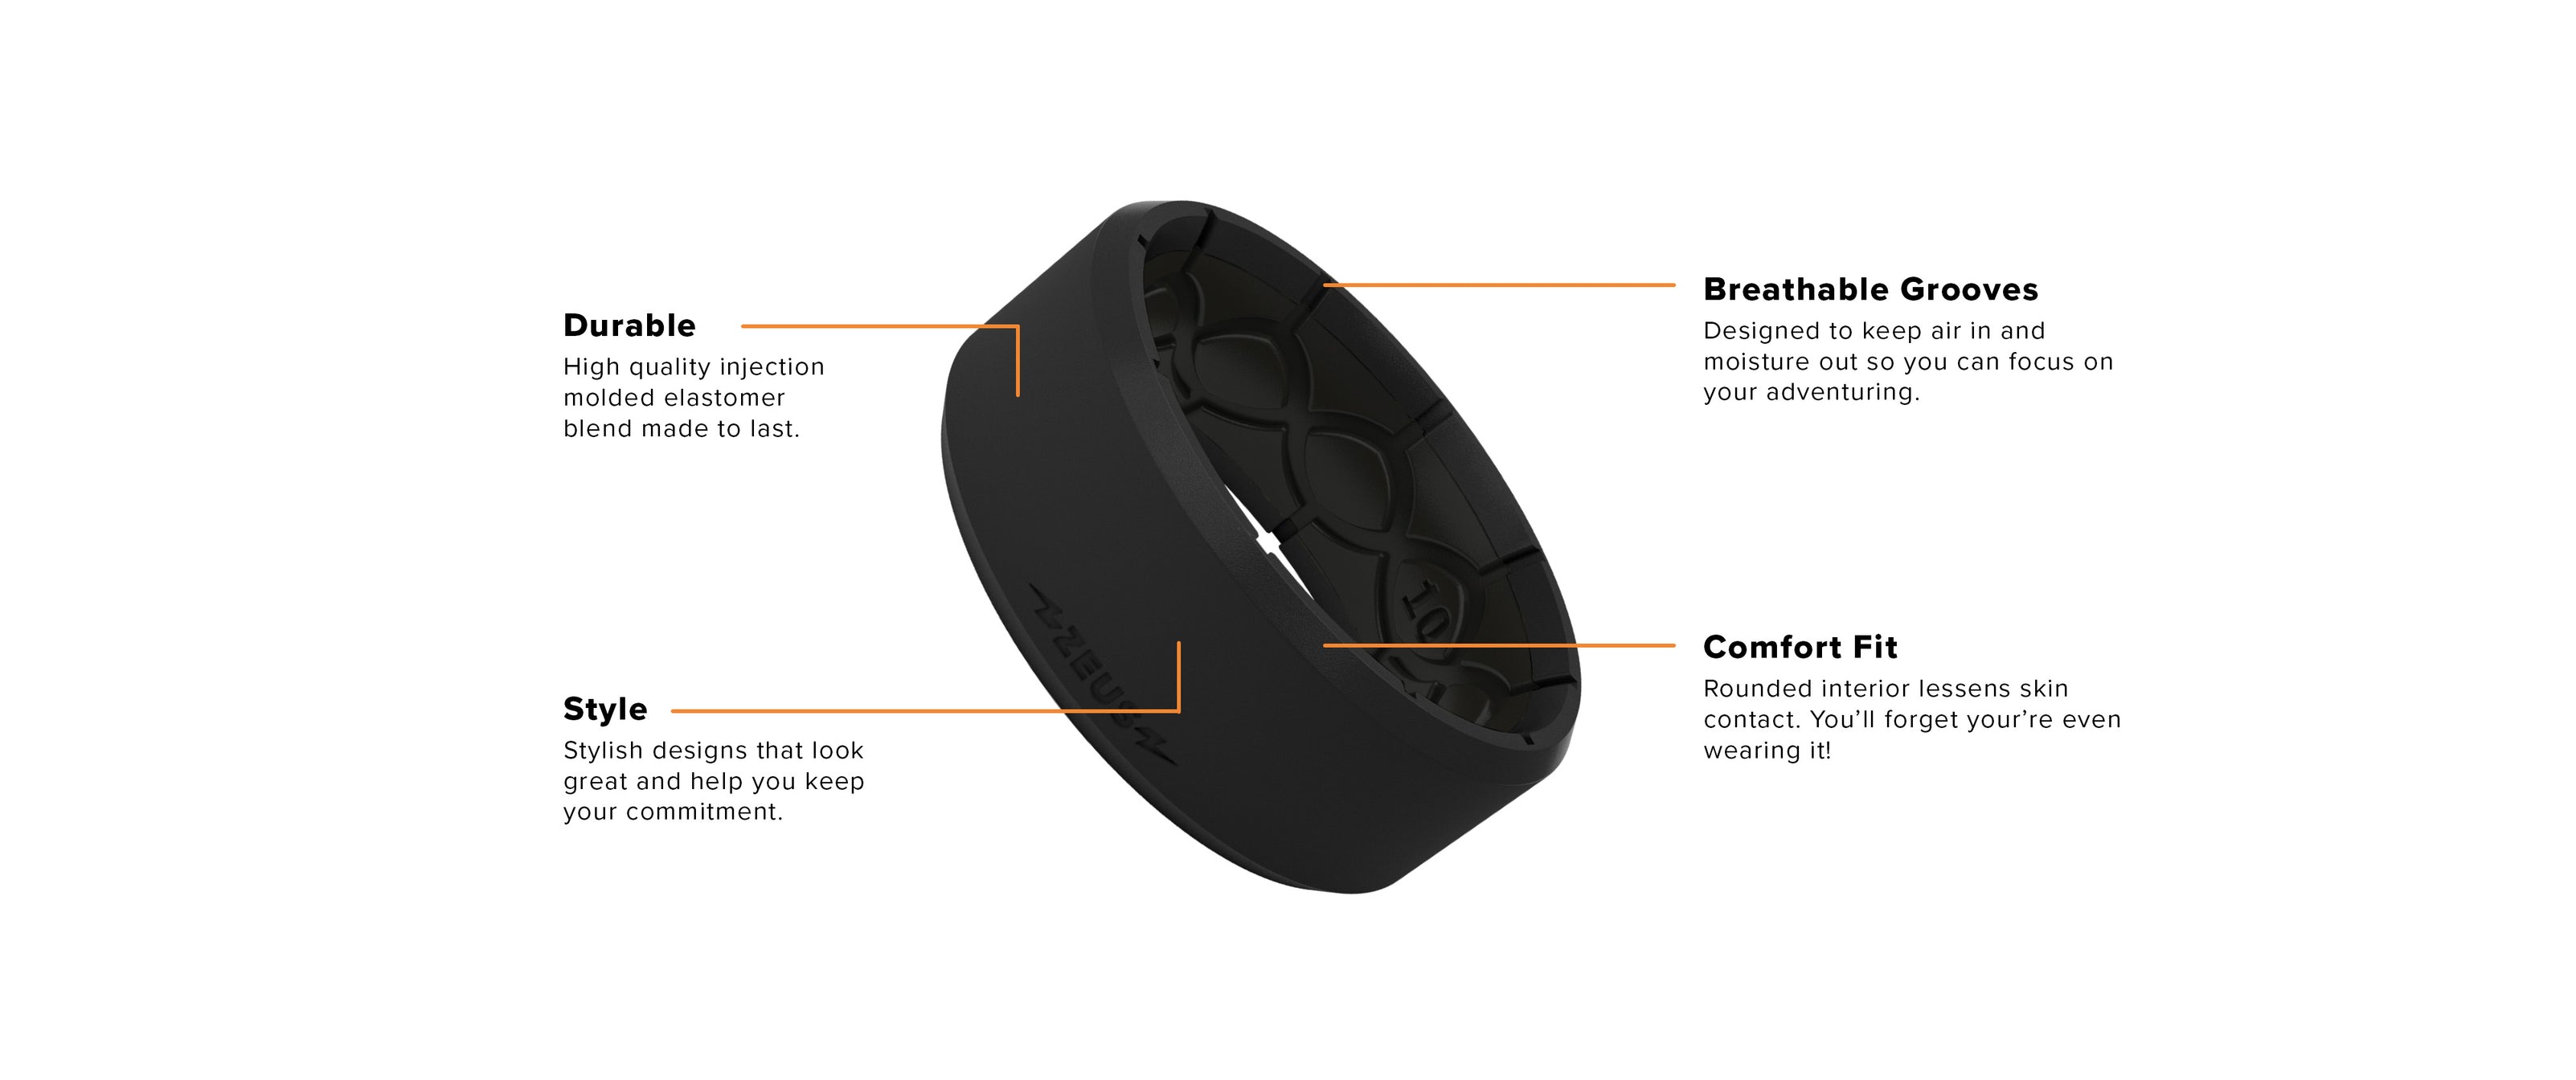 Details of Groove Life Zeus<sup>™</sup> rings. They're durable, breathable, stylish and comfortable.